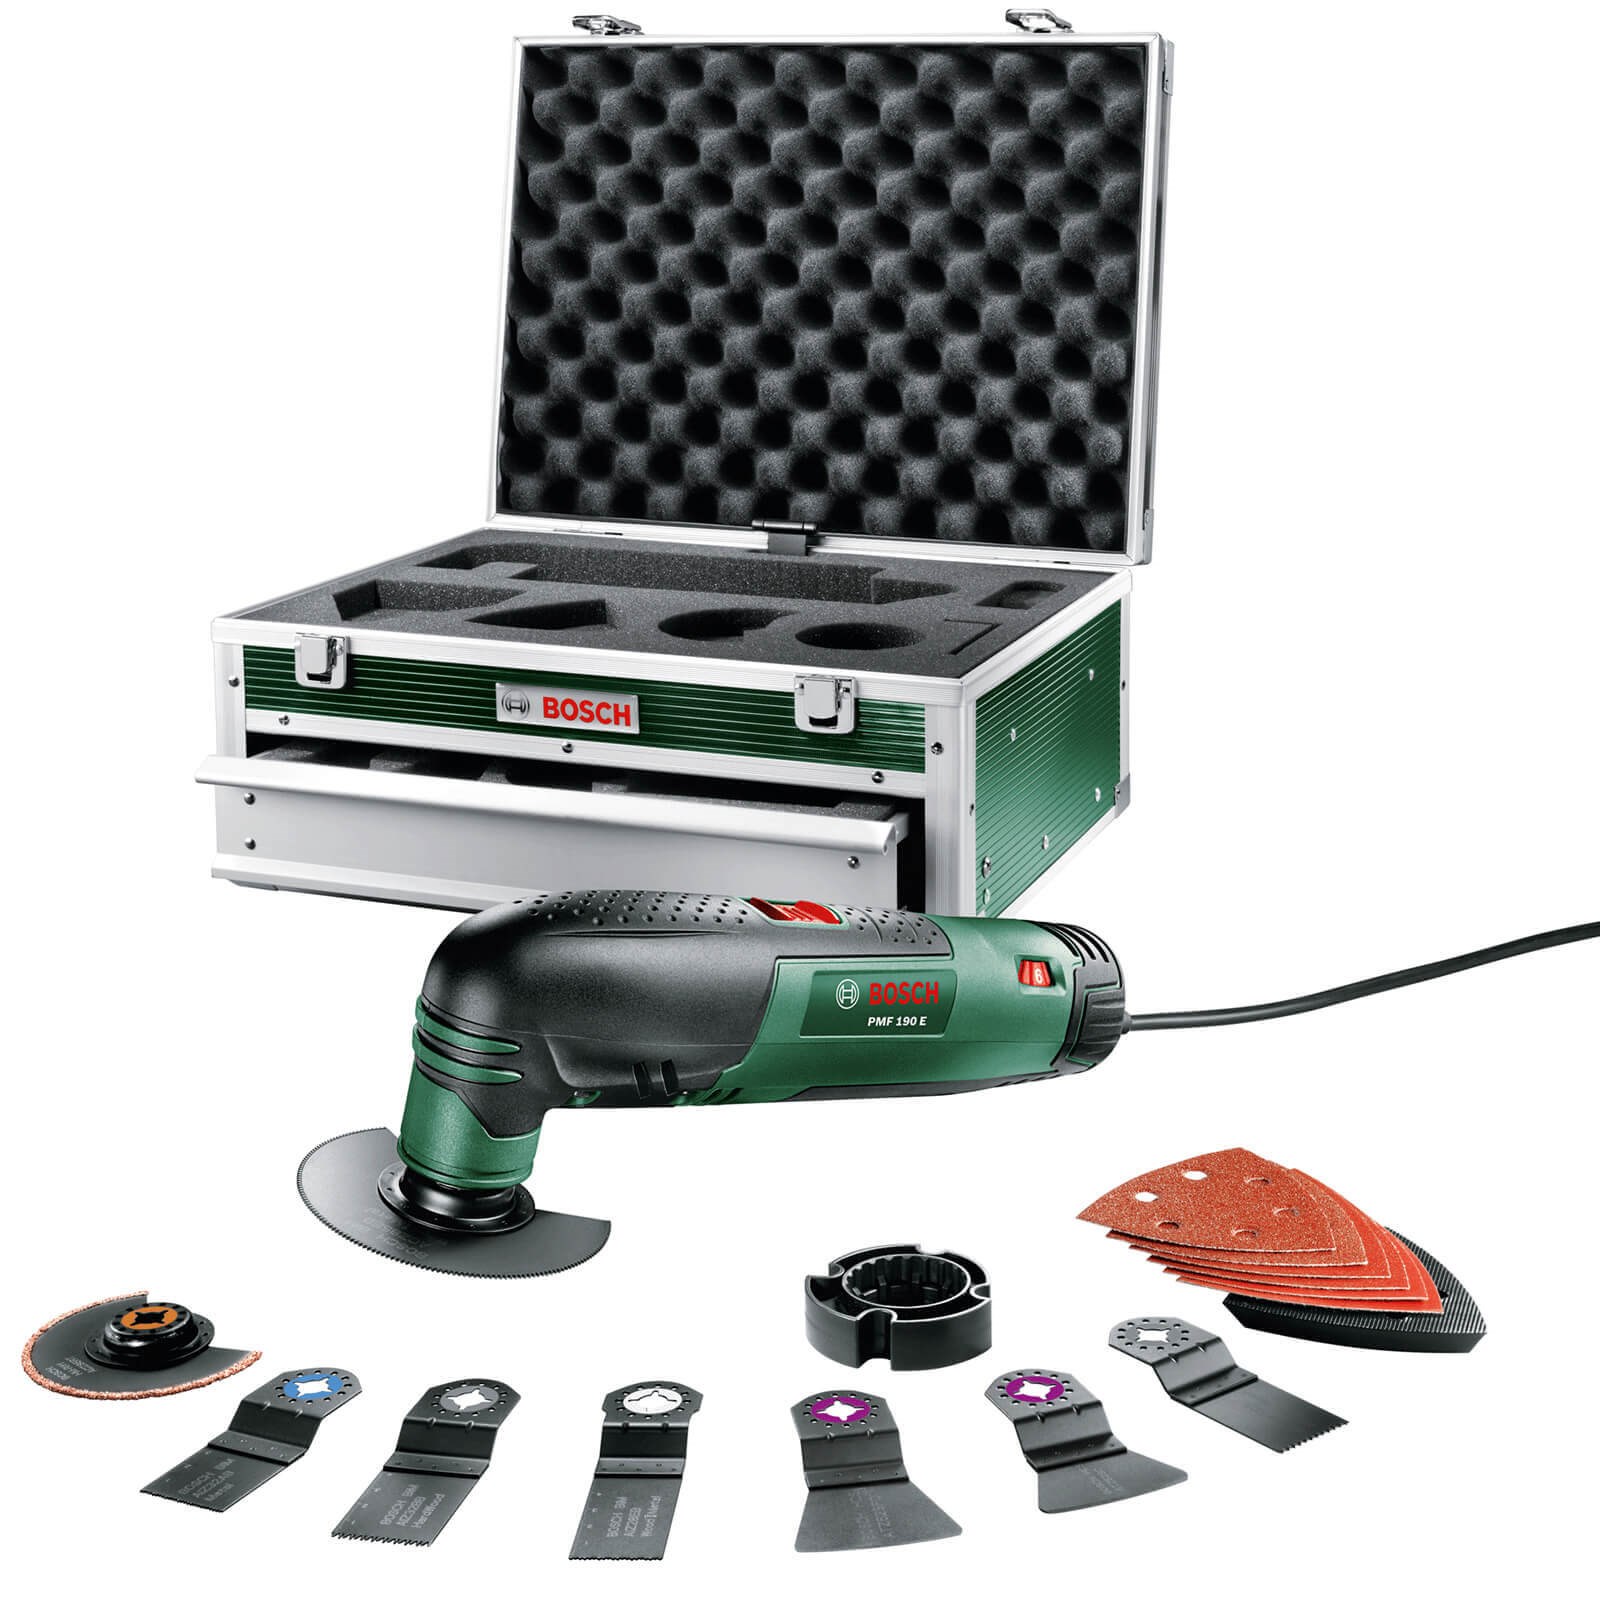 PMF 190 All Rounder In Multi Tool Box Kit | Oscillating Multi Tools